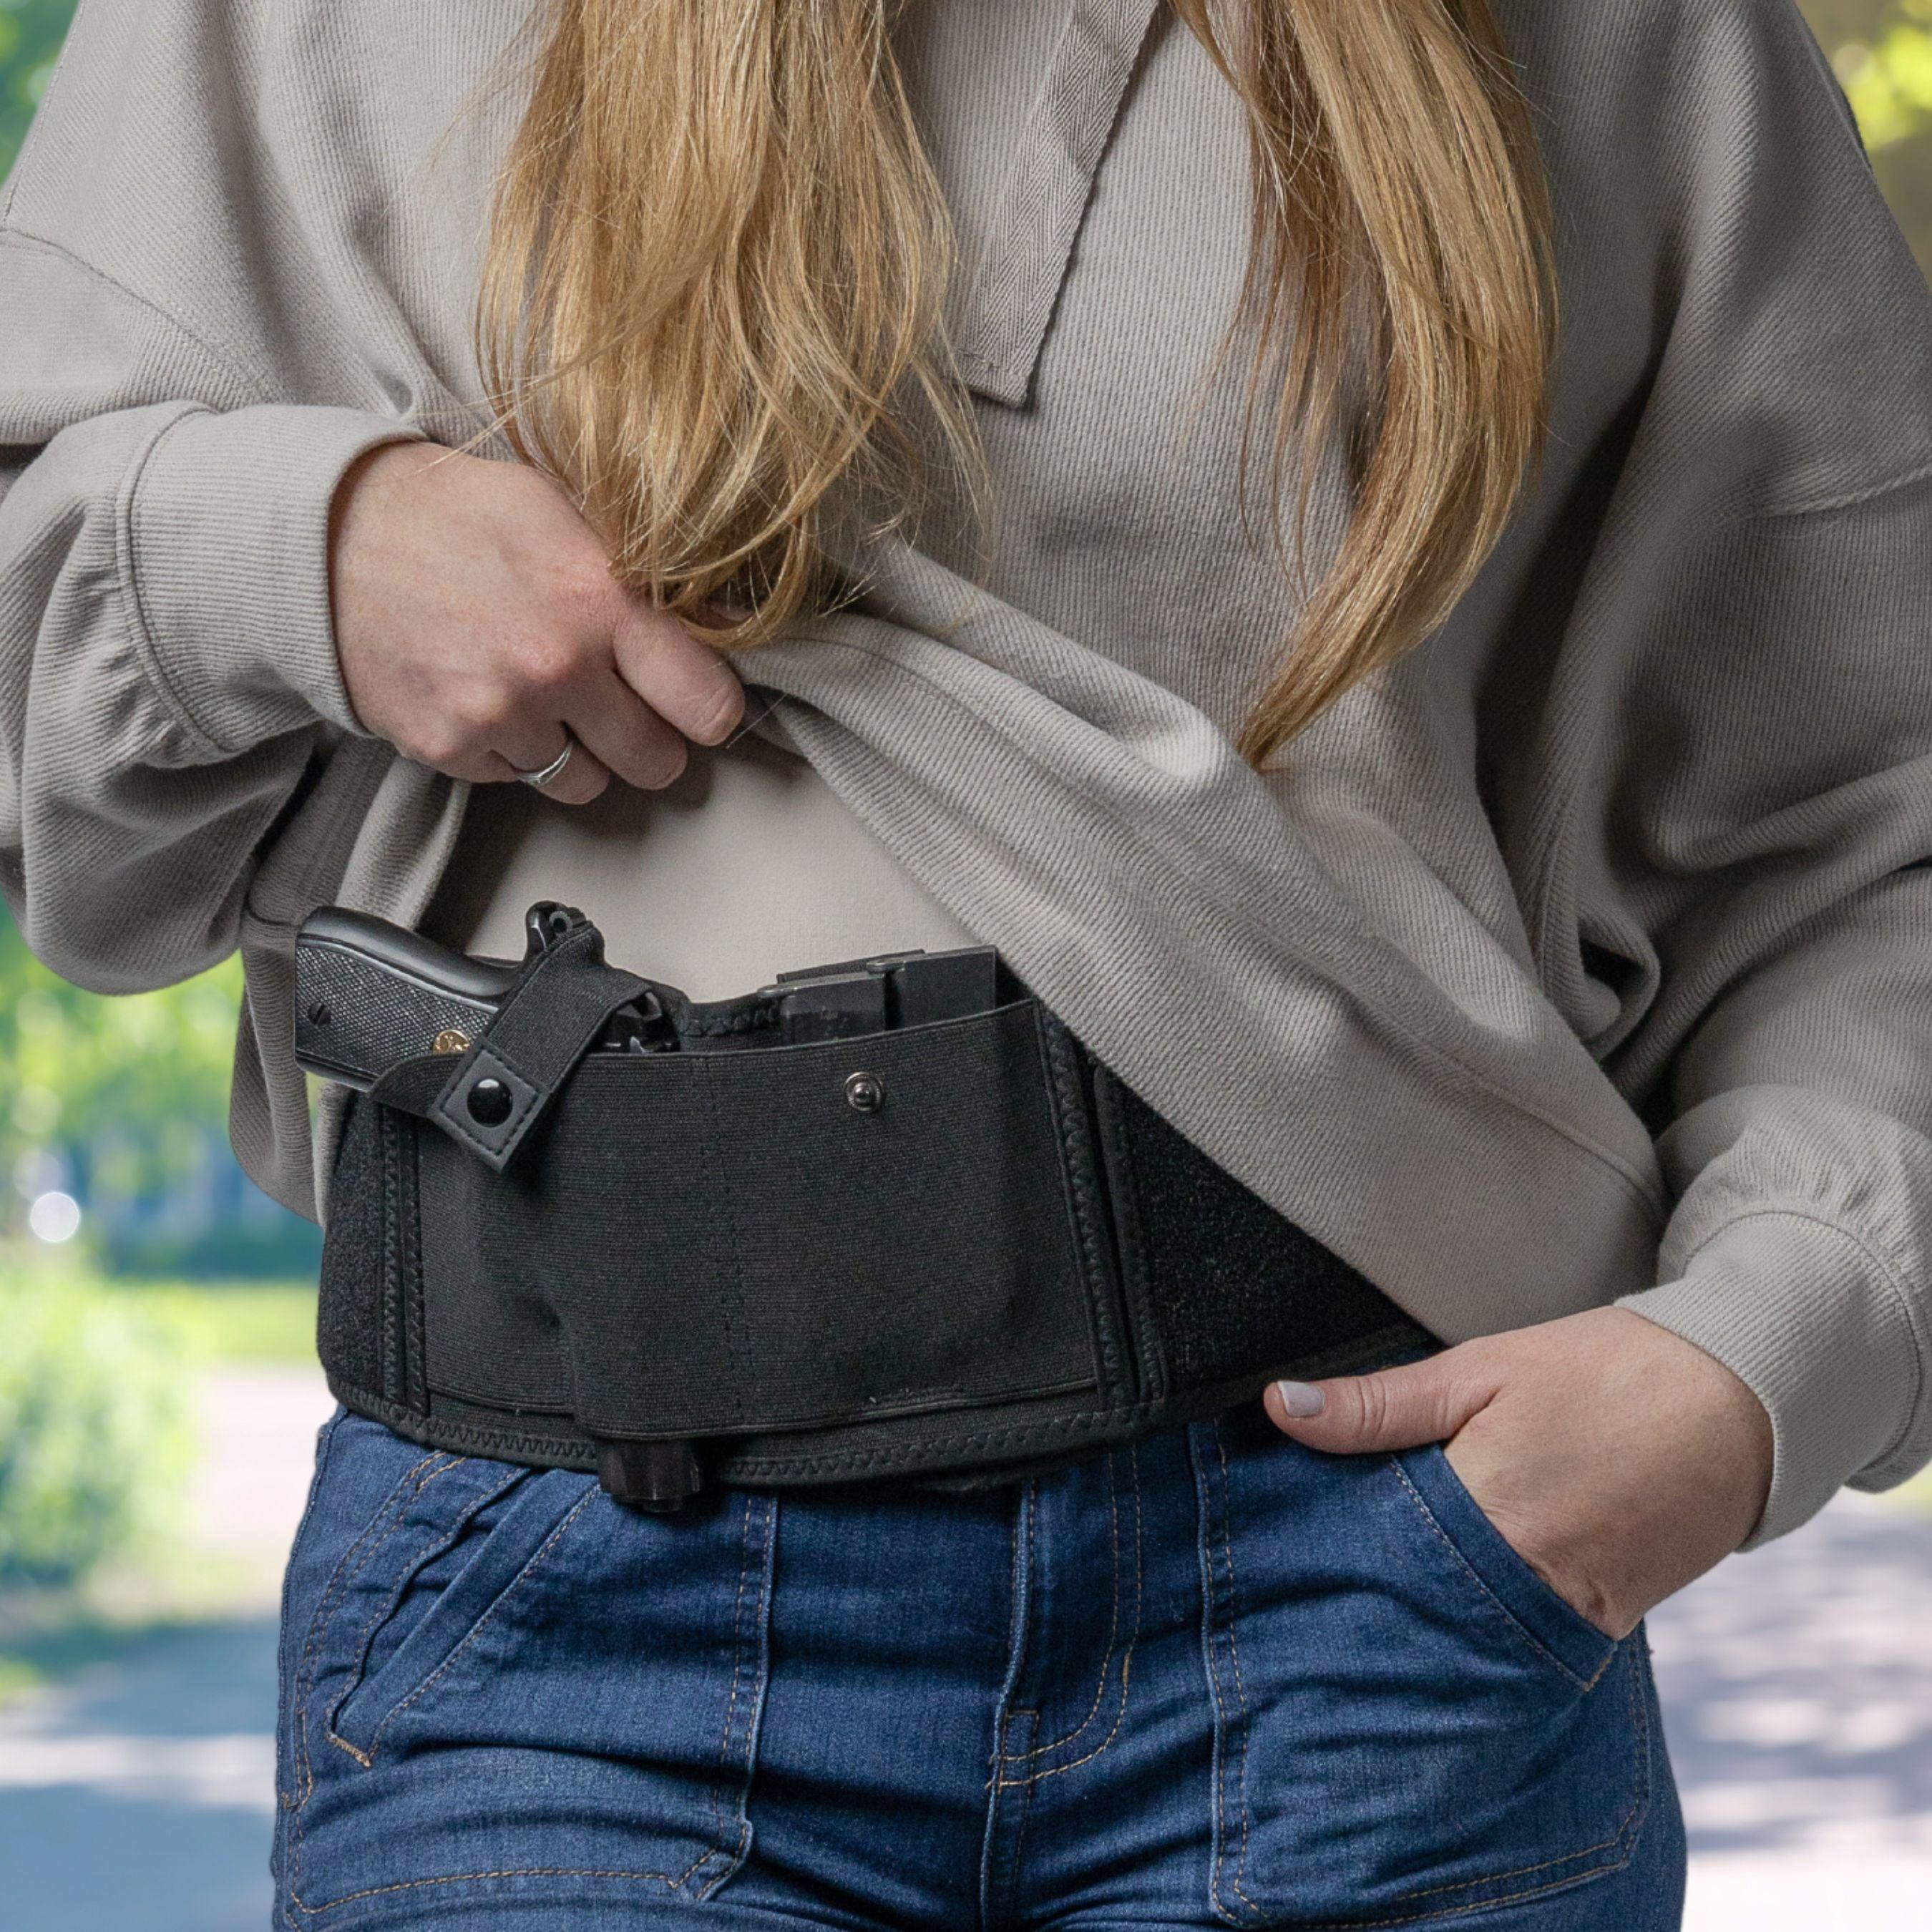 As Women Rush To Obtain Concealed-Carry Firearms Permits, Female